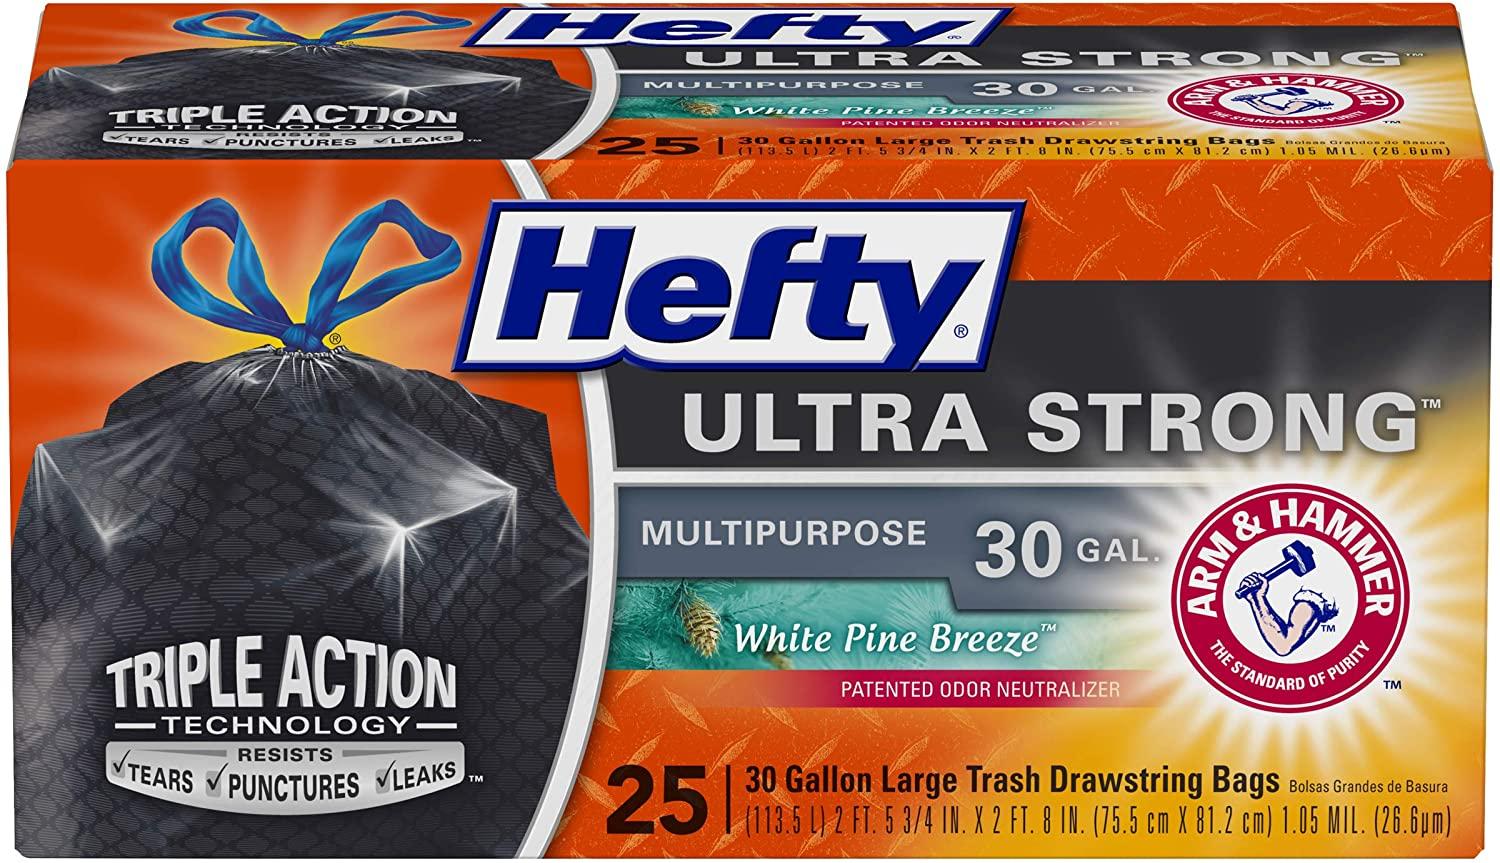 25 30-Gallon Hefty Ultra Strong Trash Bags for $6.64 Shipped